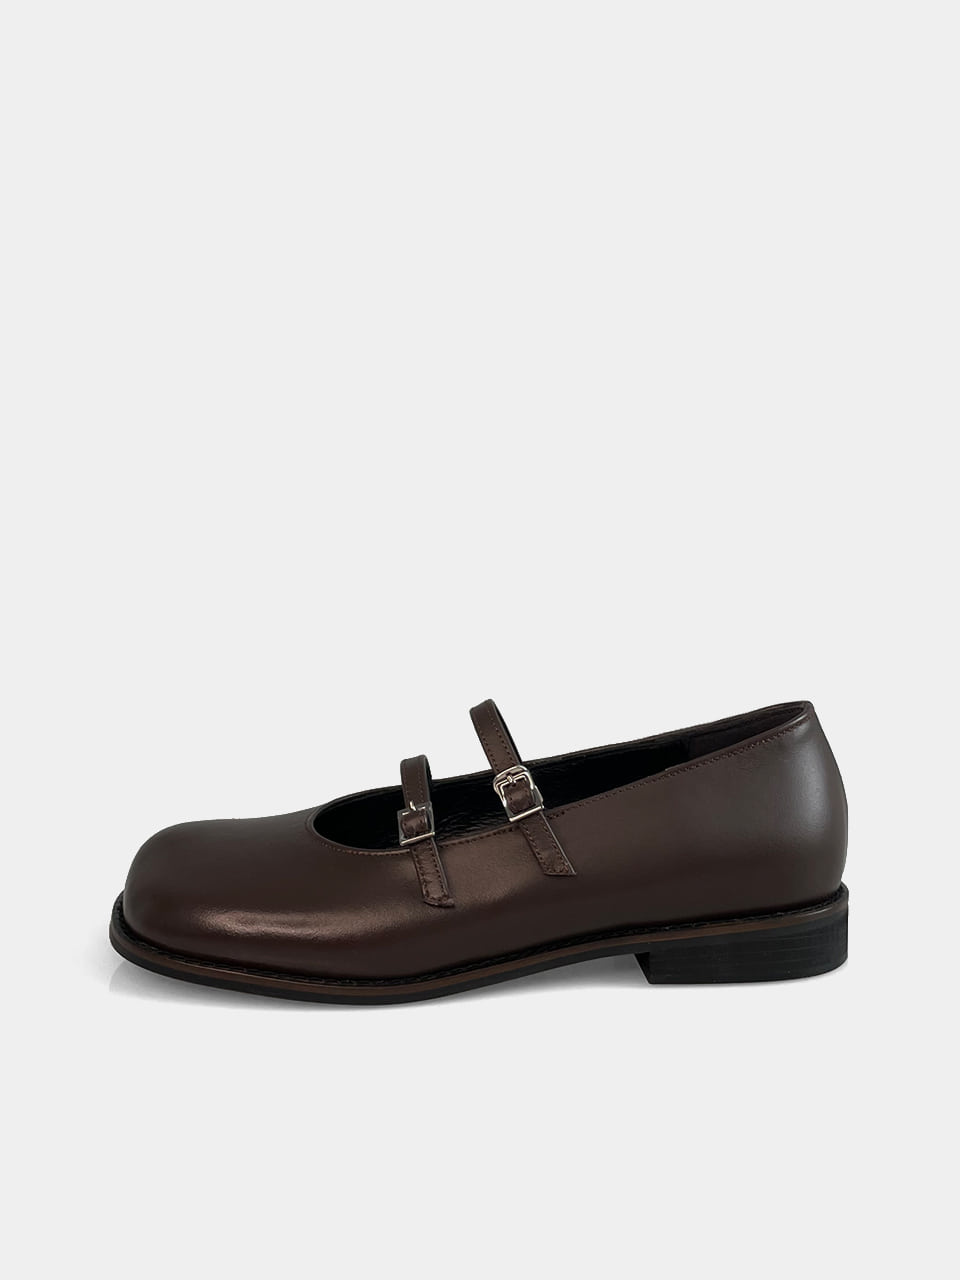 [Out of stock] Mrc101 Mary Jane Flat (Midnight Brown)